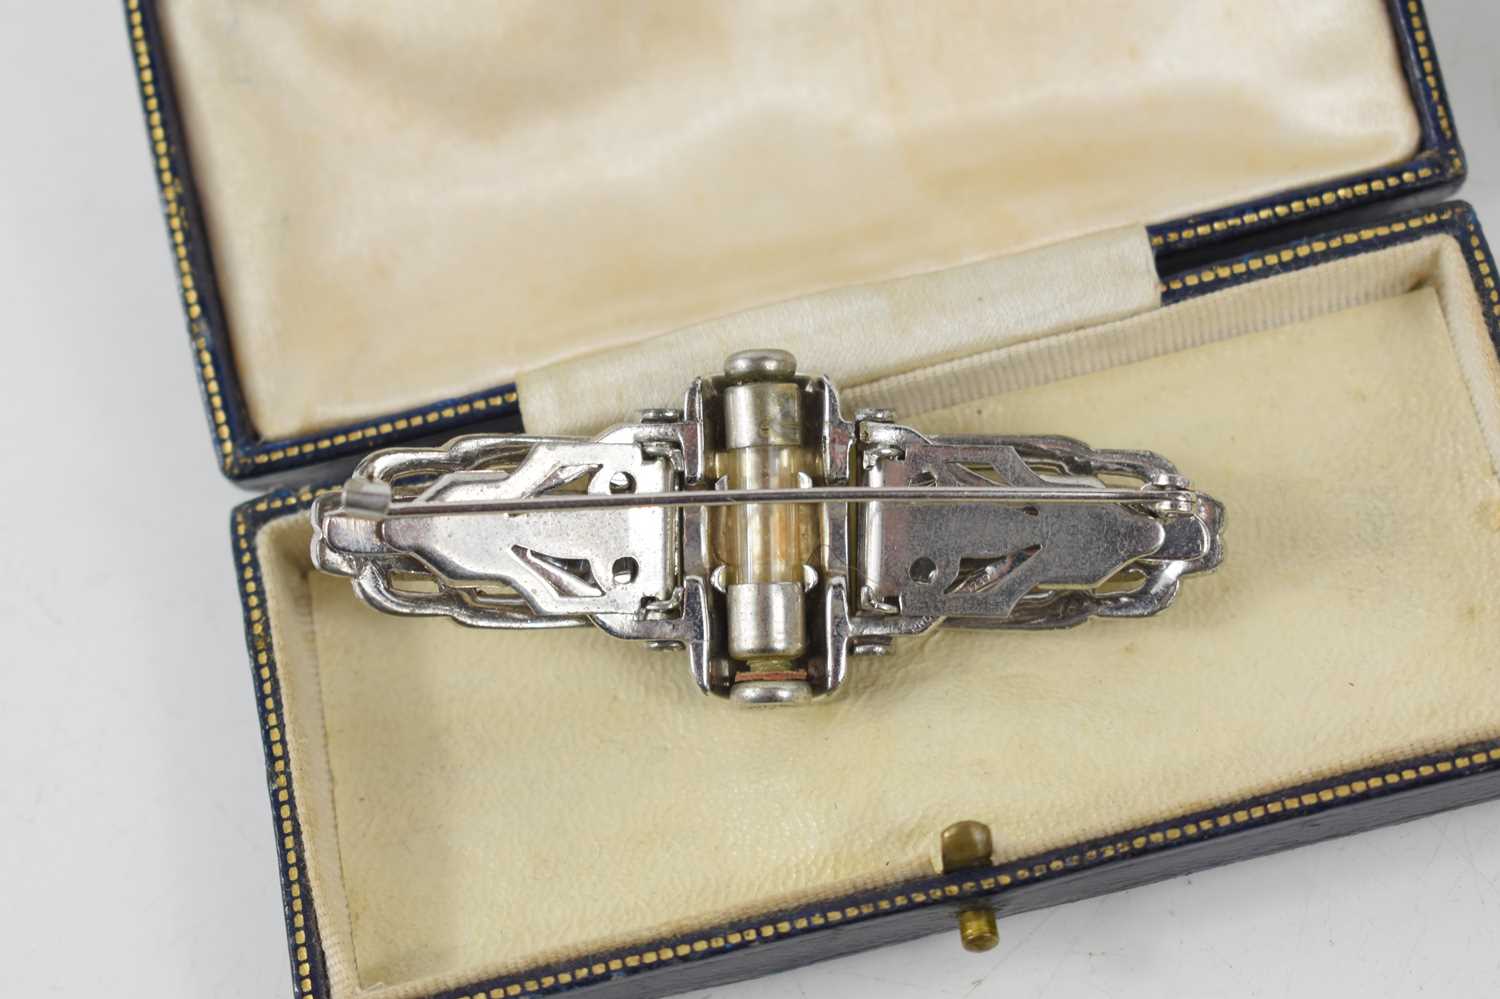 An Art Deco metamorphic dress brooch, inbuilt with a small glass perfume vial, both contained in a - Image 3 of 3